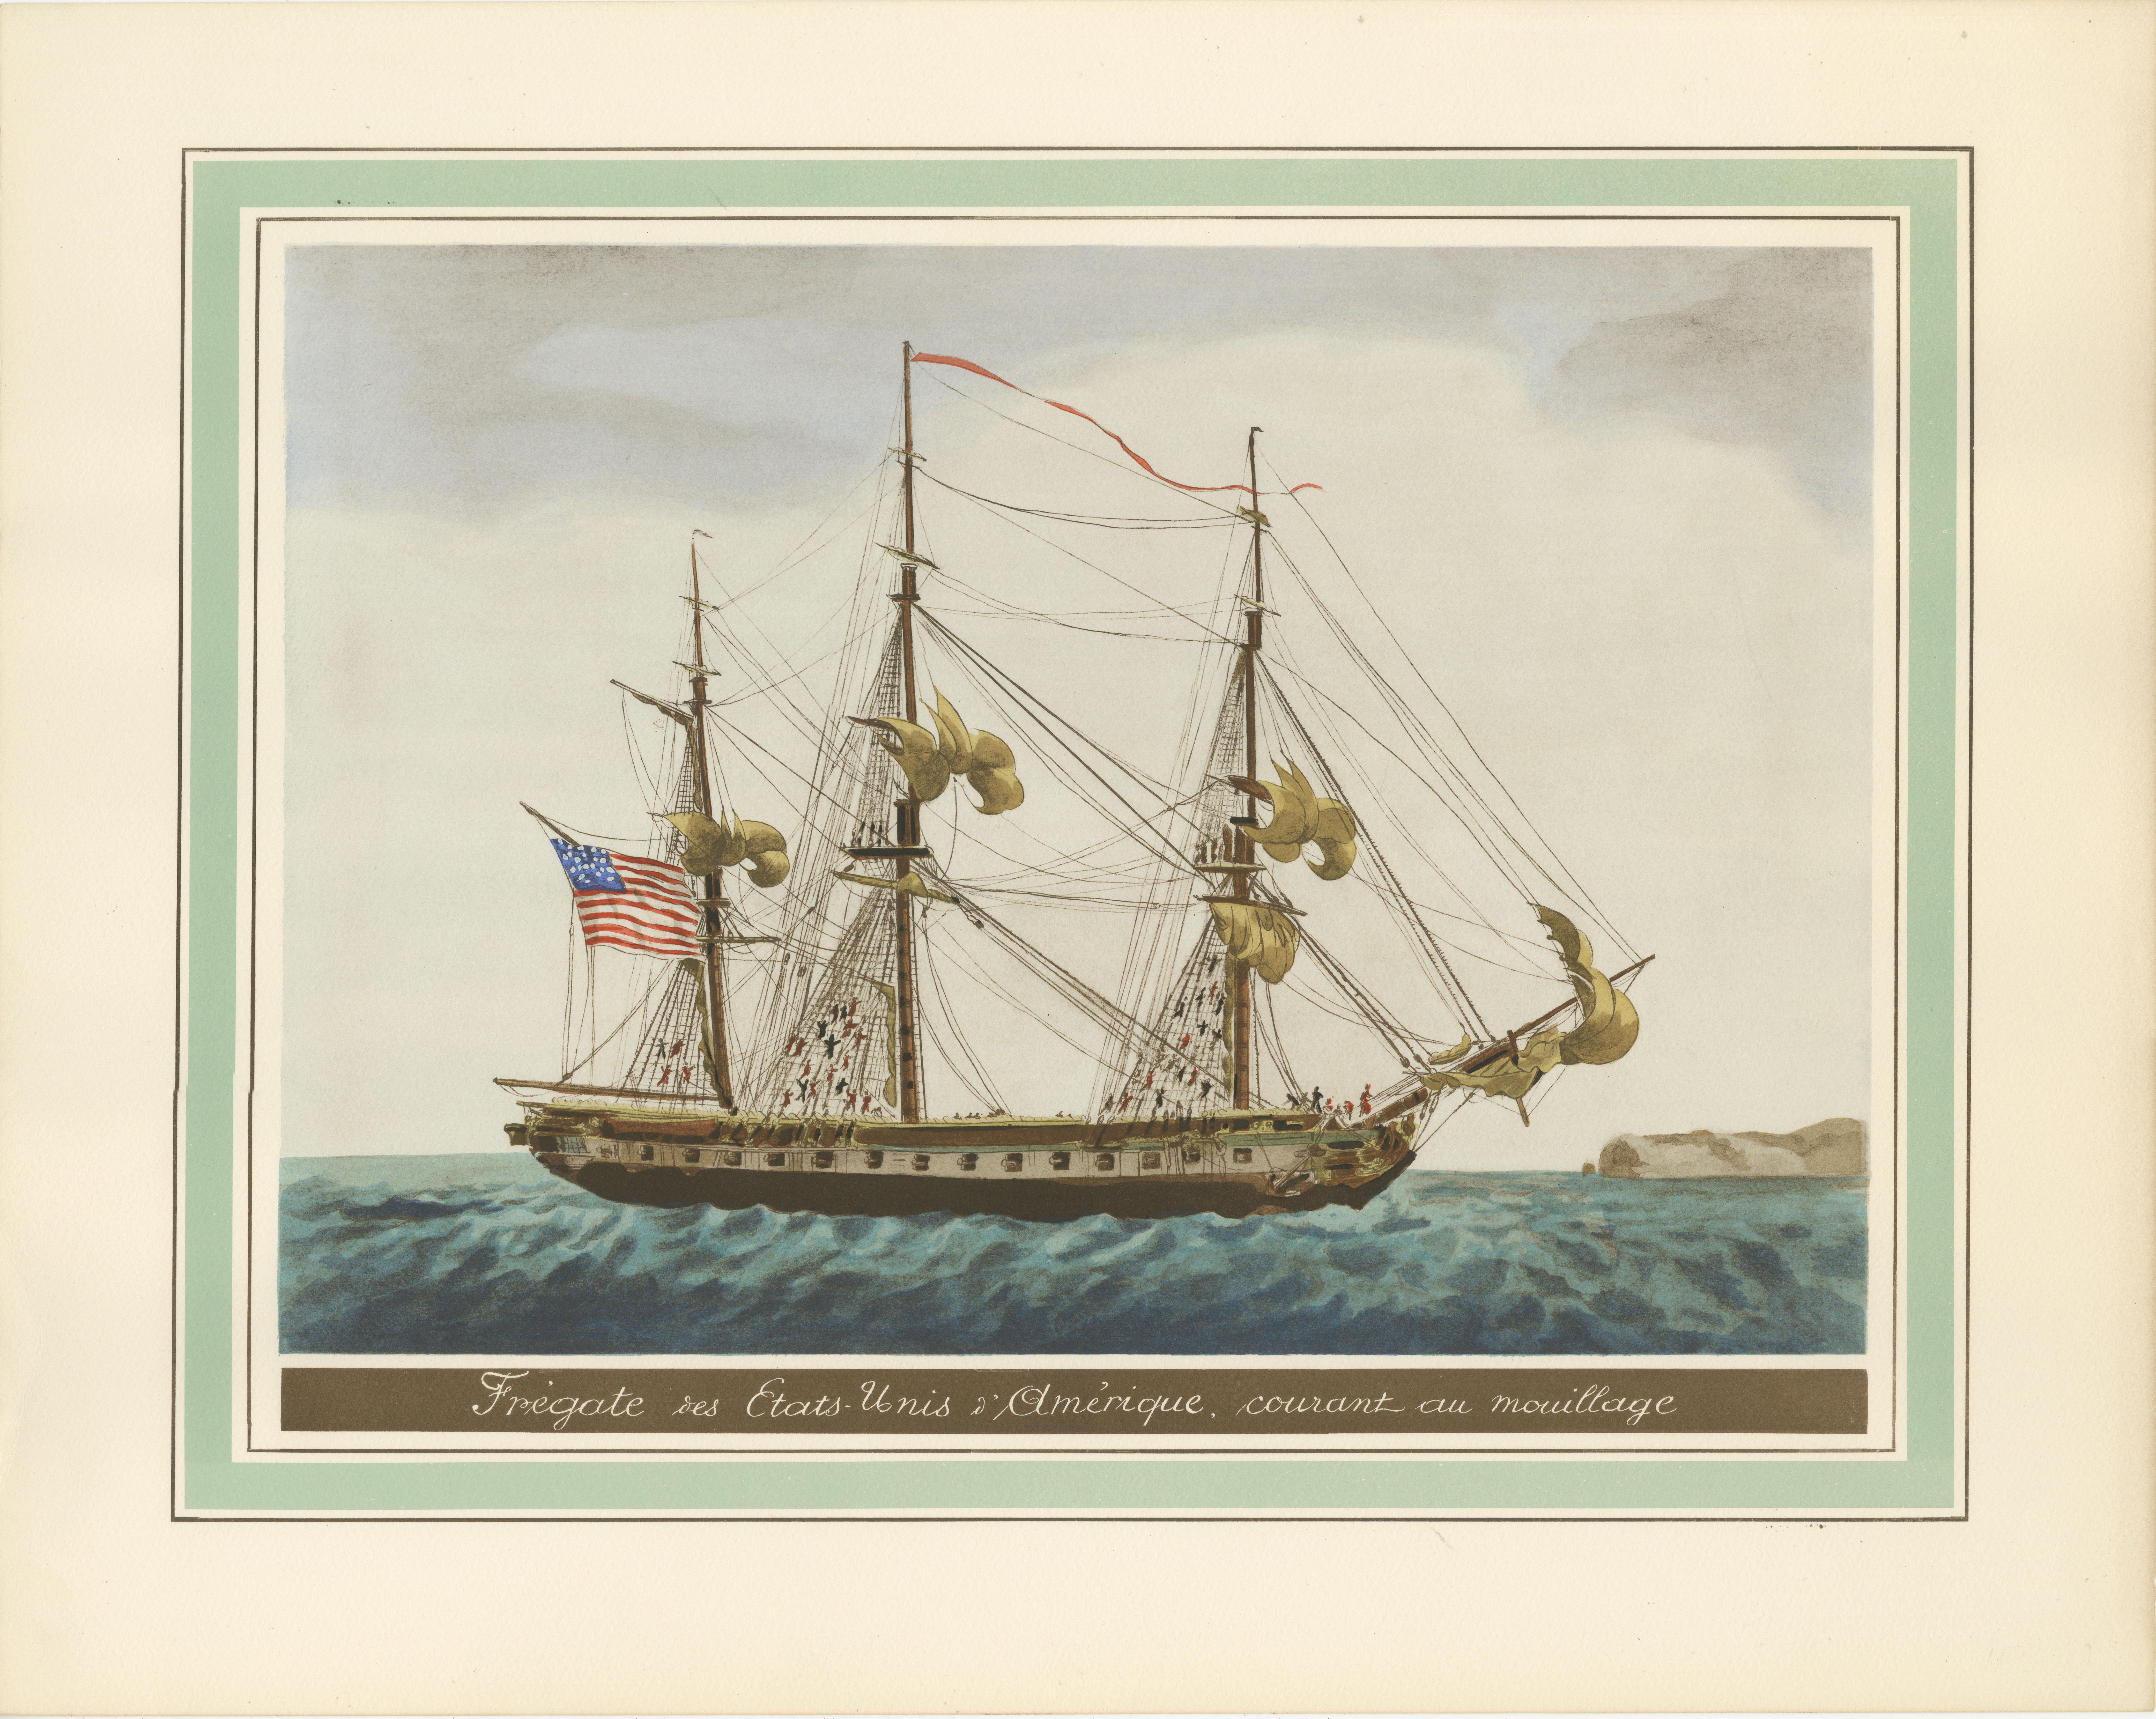 This print depicts an American frigate from the caption 